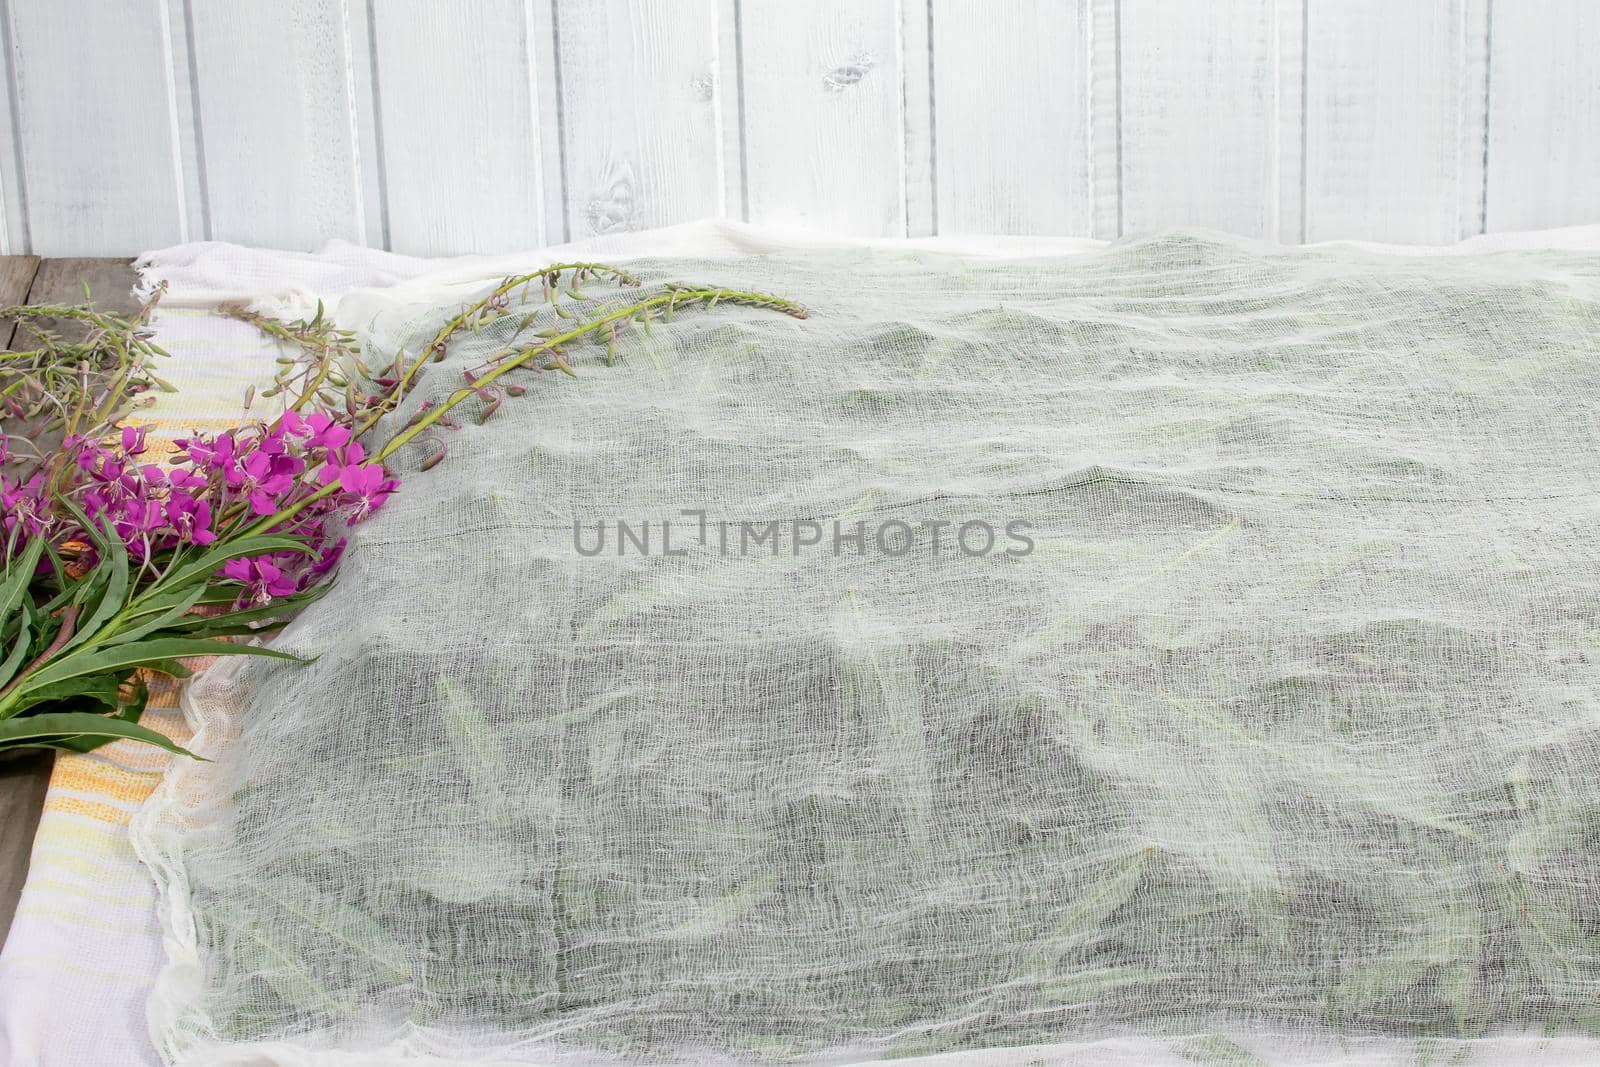 Harvesting fireweed for tea - drying spread leaves and flowers under a thin cloth by galsand